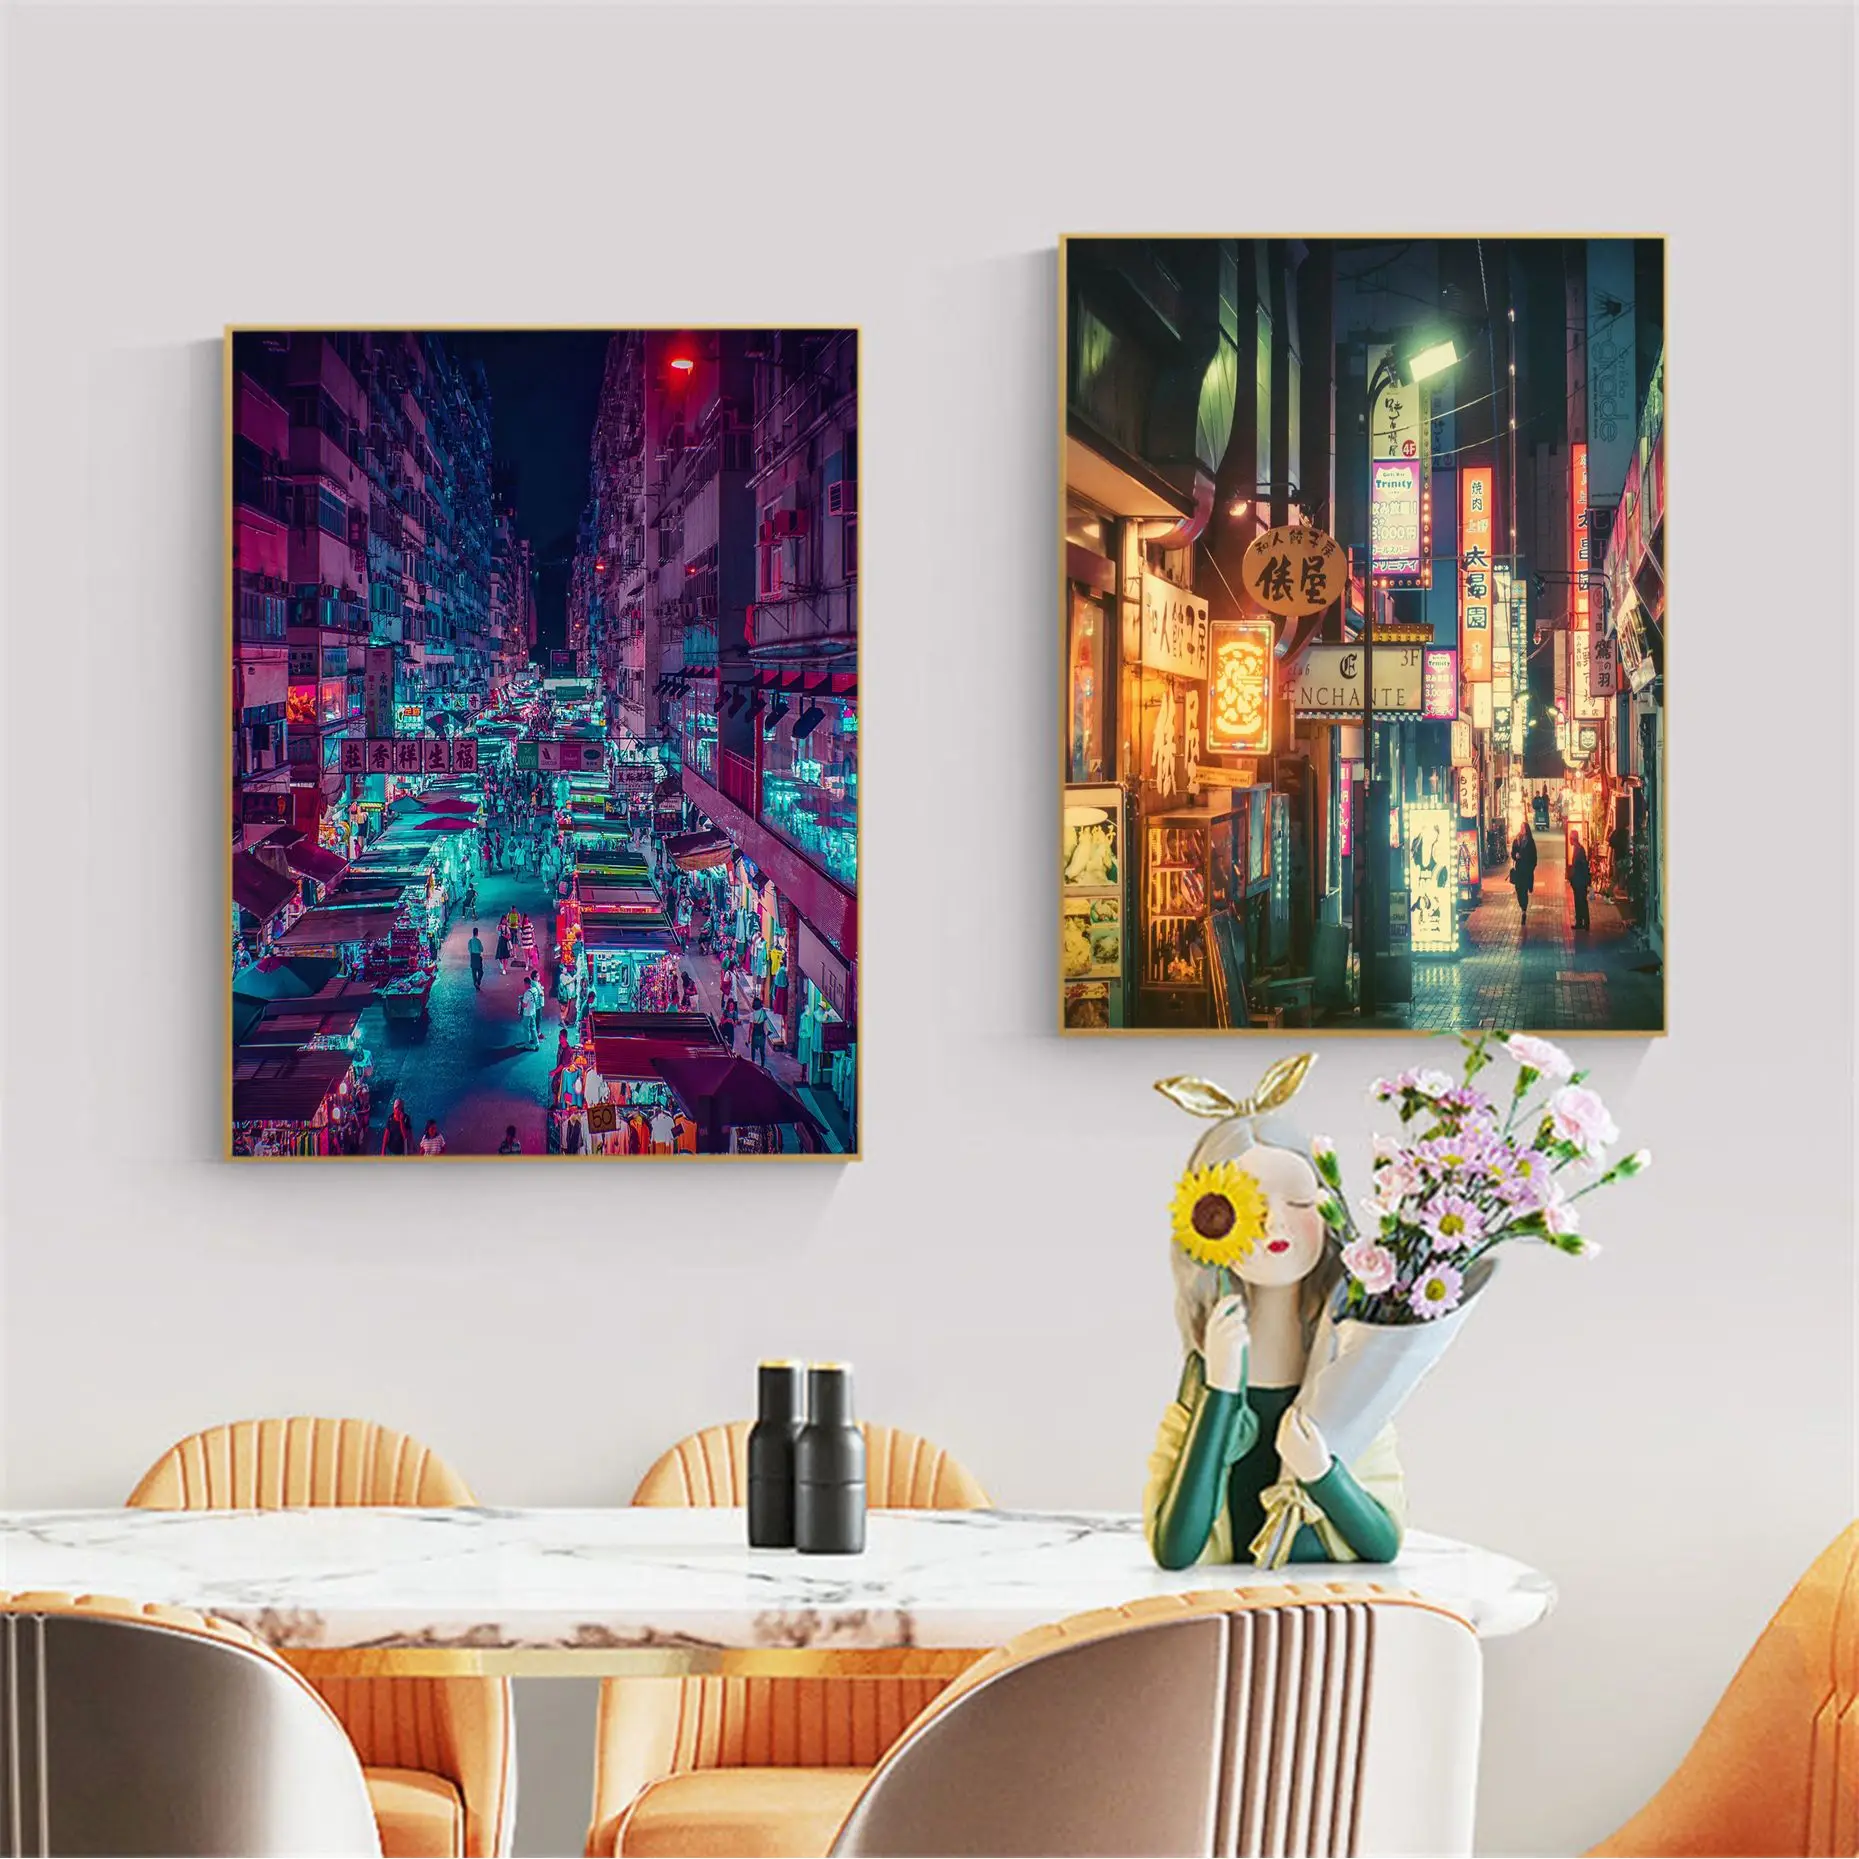 Neon City Night Street Self-adhesive Art Poster Fancy Wall Sticker For Living Room Bar Decoration Stickers Wall Painting